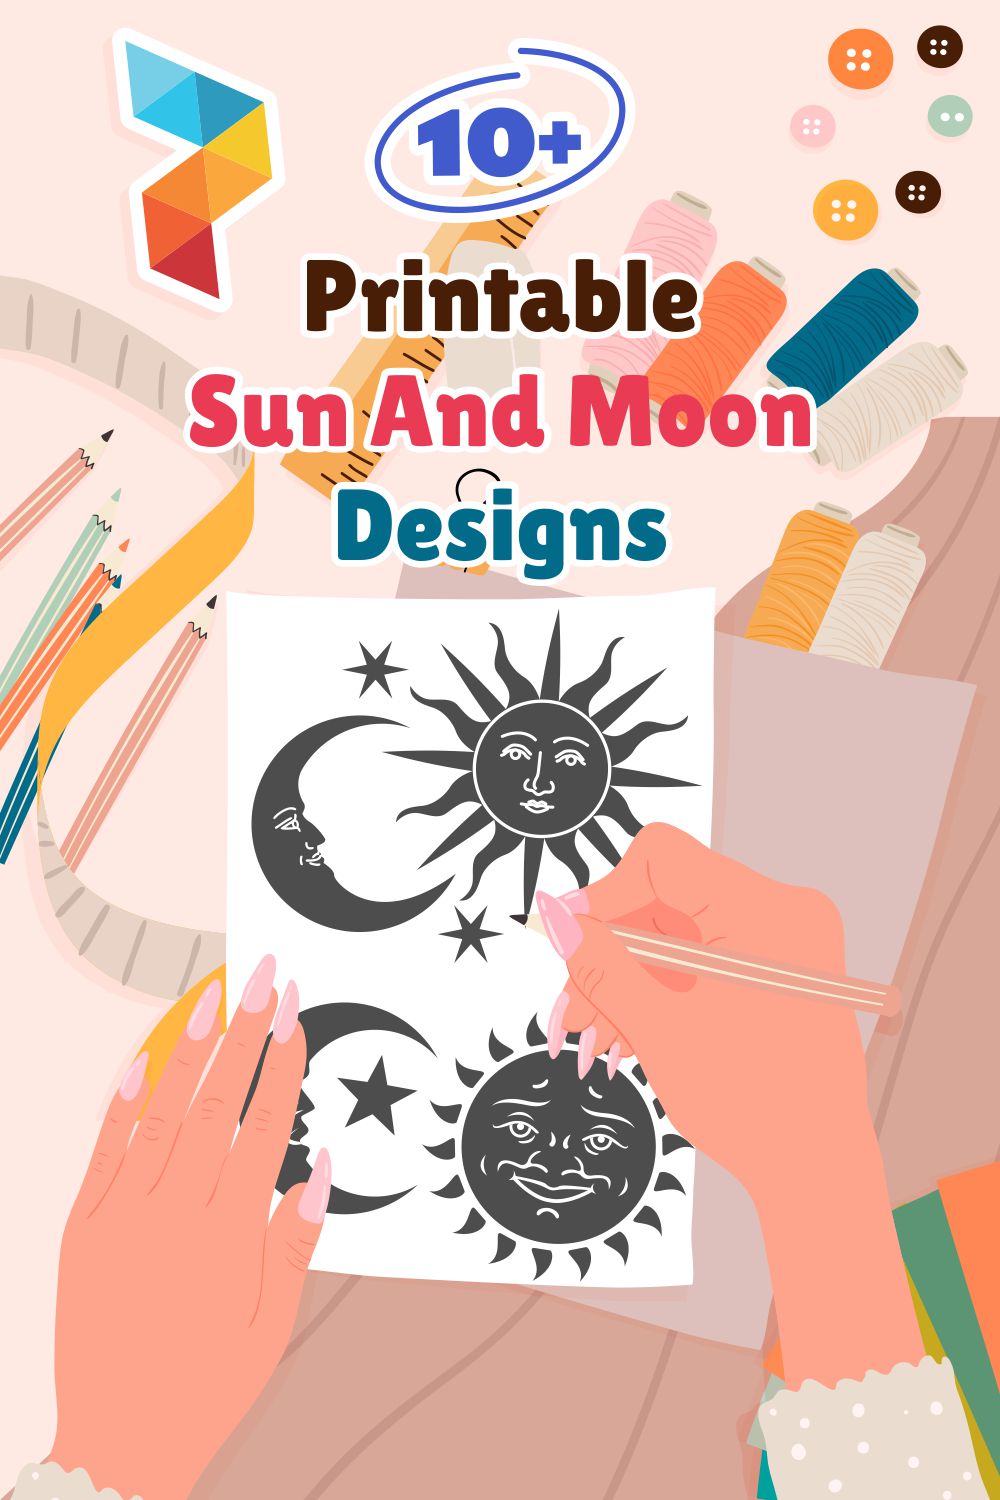 Sun And Moon Designs